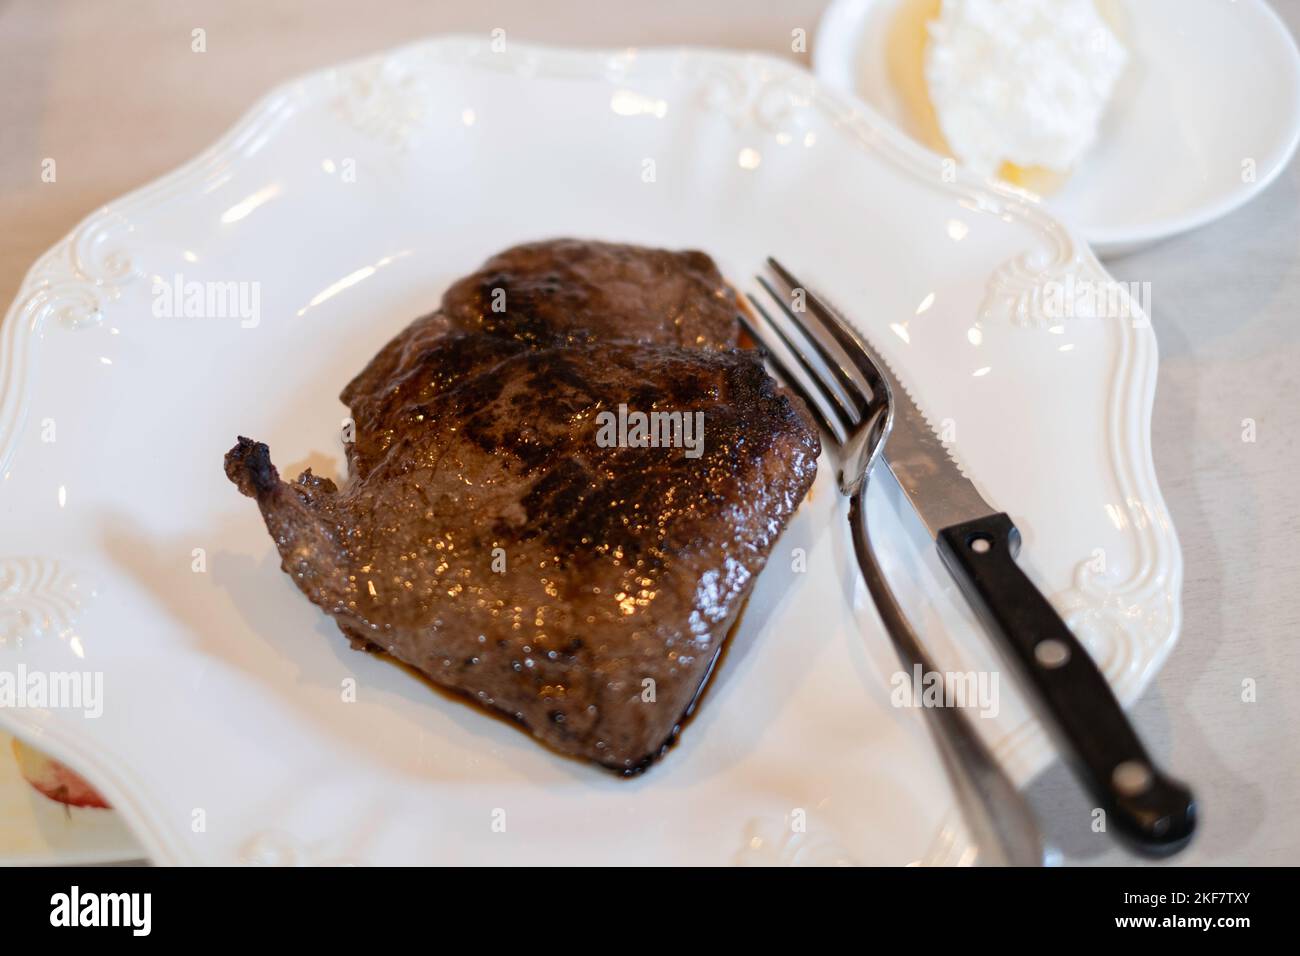 Grilled sirloin steak on a white plate with eating utensils, a knife and fork. Stock Photo